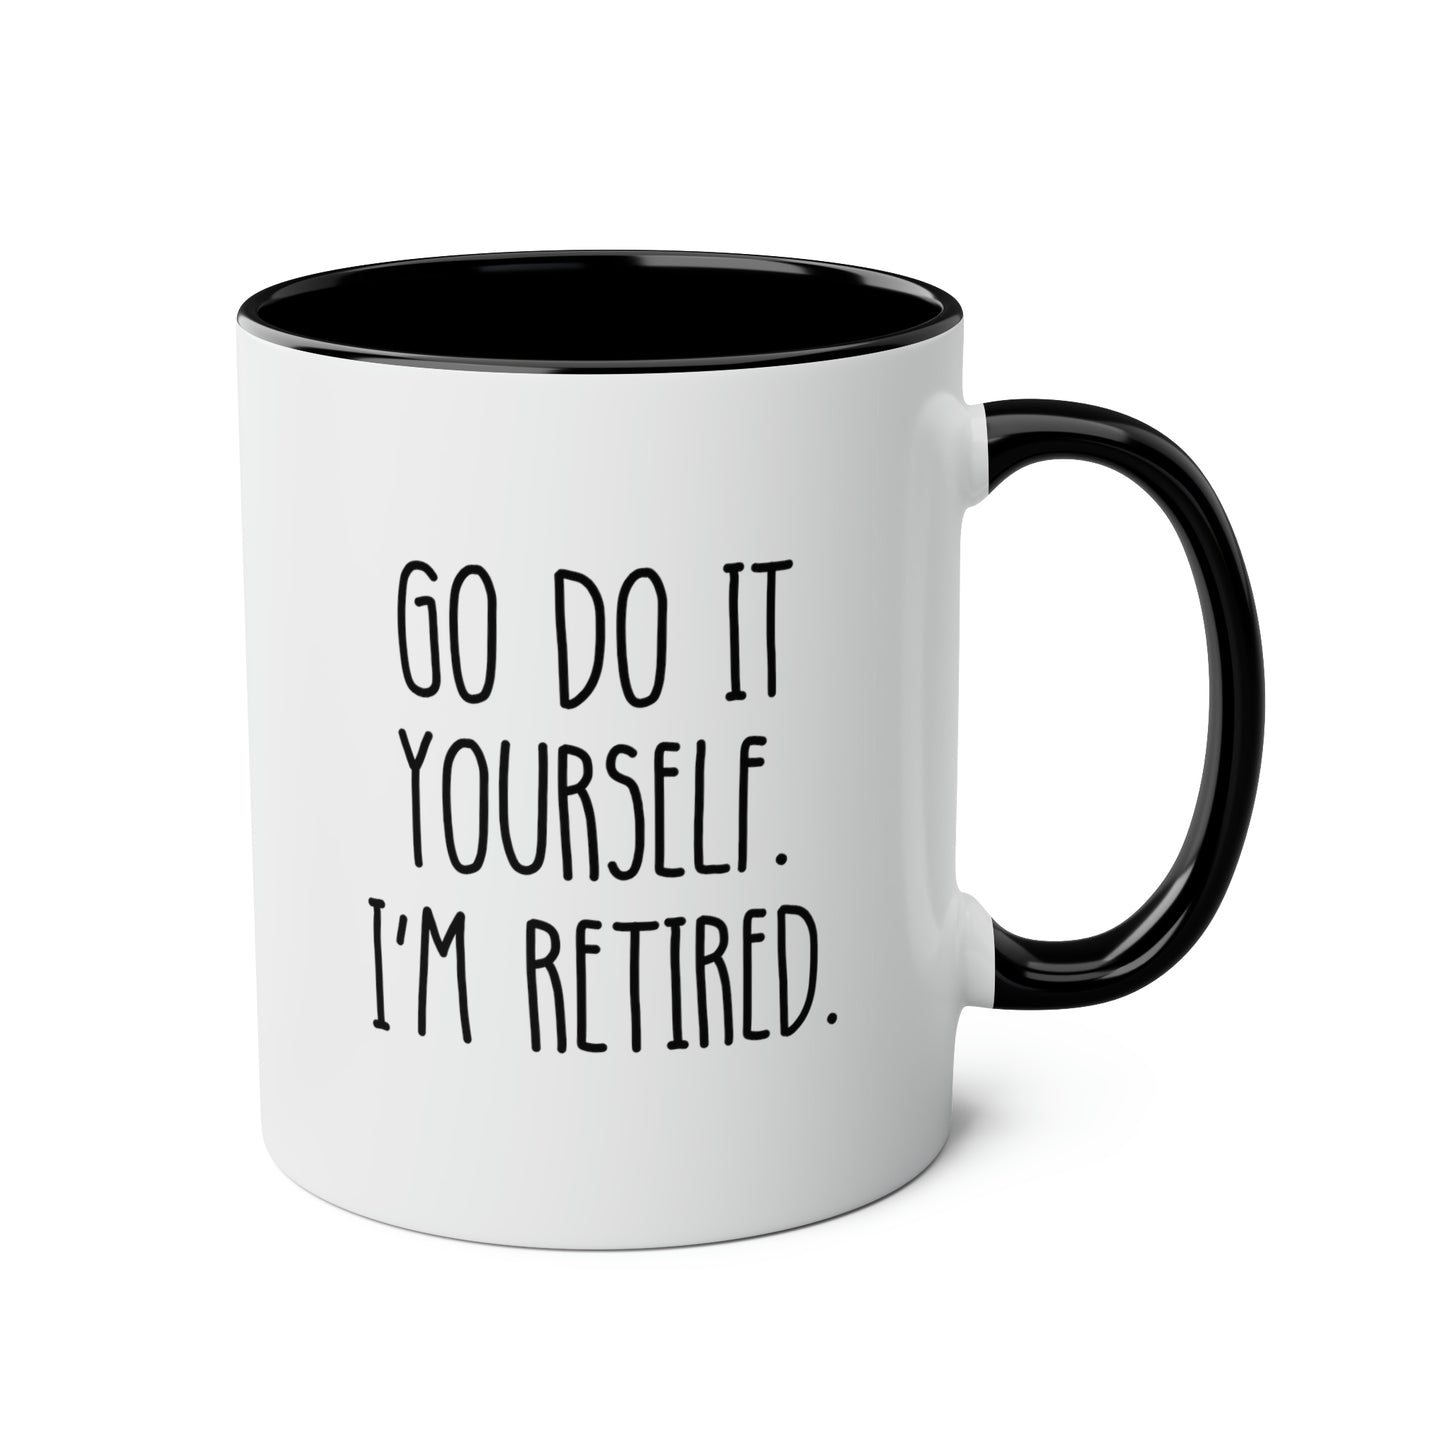 Go Do It Yourself I'm Retired 11oz white with black accent funny large coffee mug gift for­ retiree new retirement women men waveywares wavey wares wavywares wavy wares